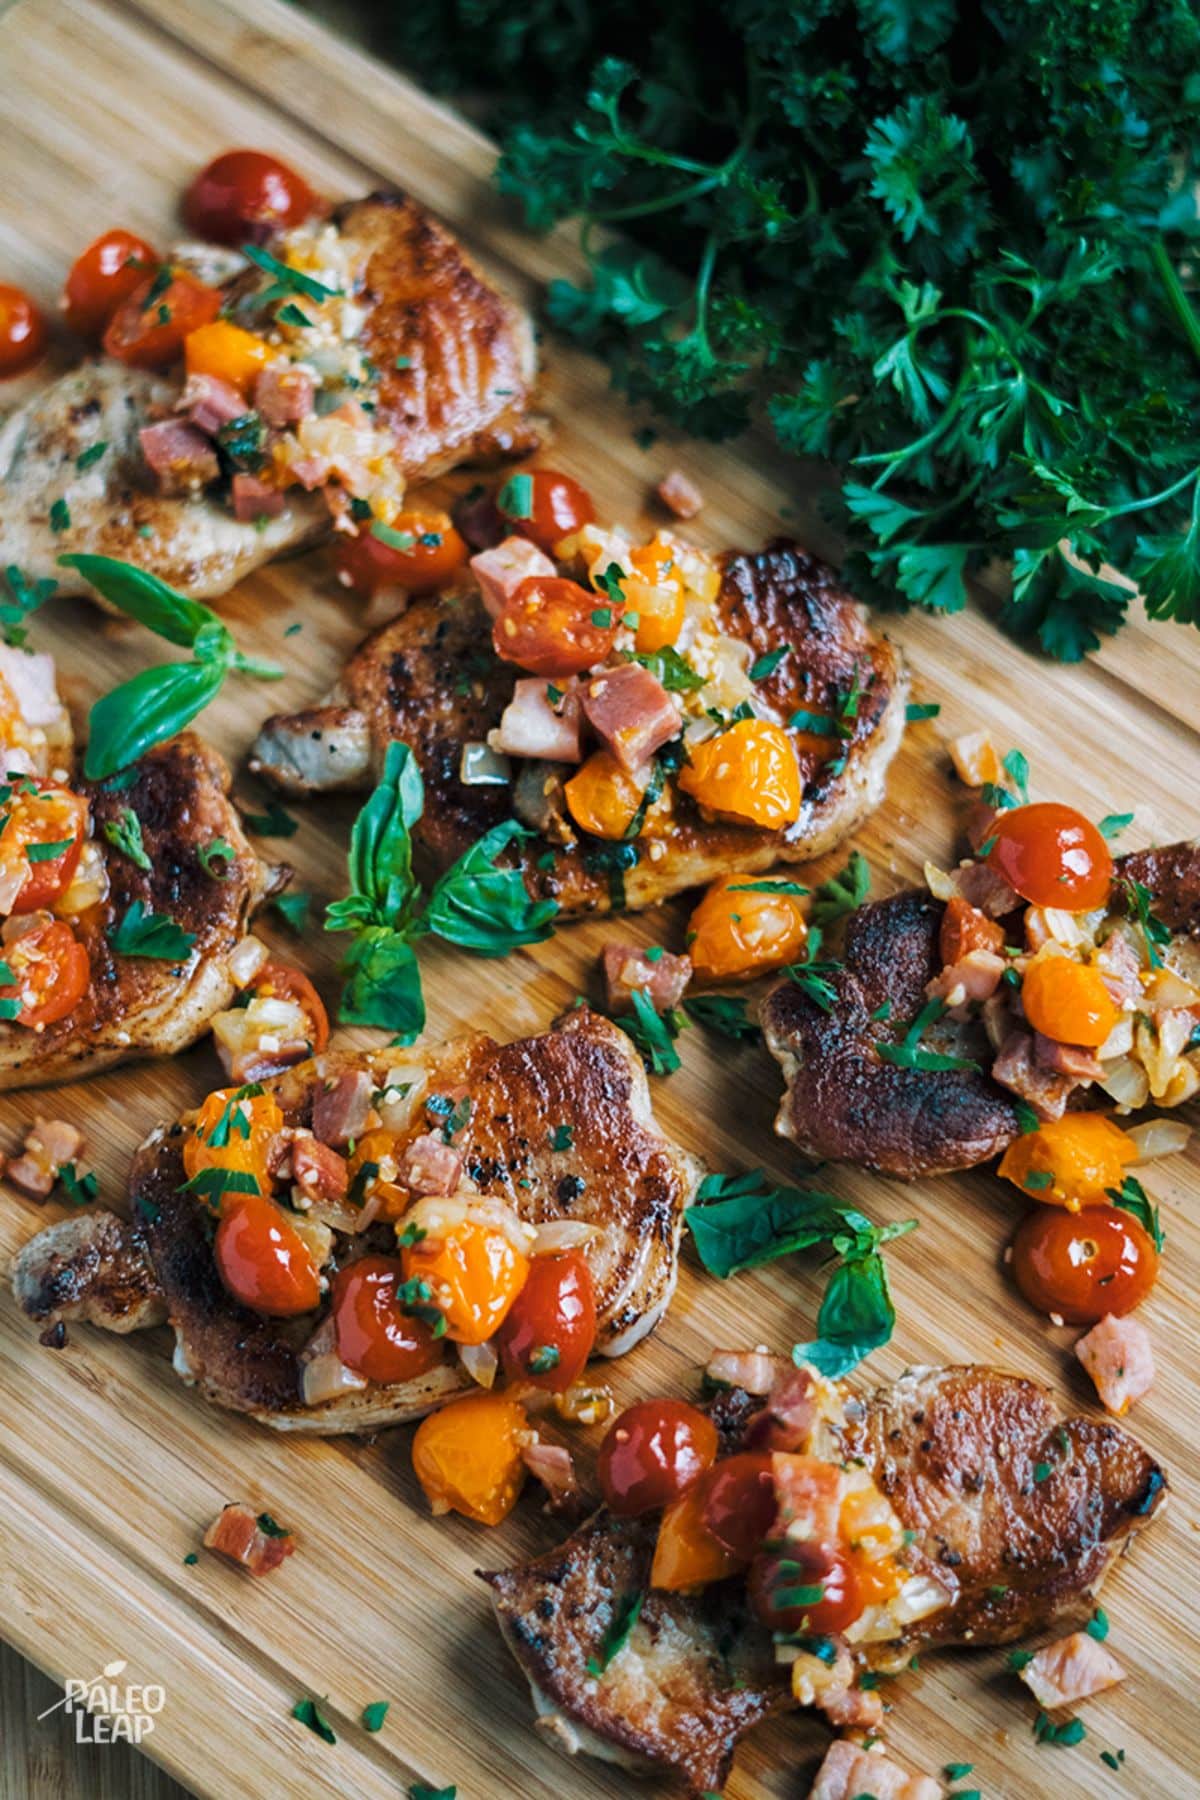 Pork Chops With Tomato-Pancetta Salad on a wooden cutting board.